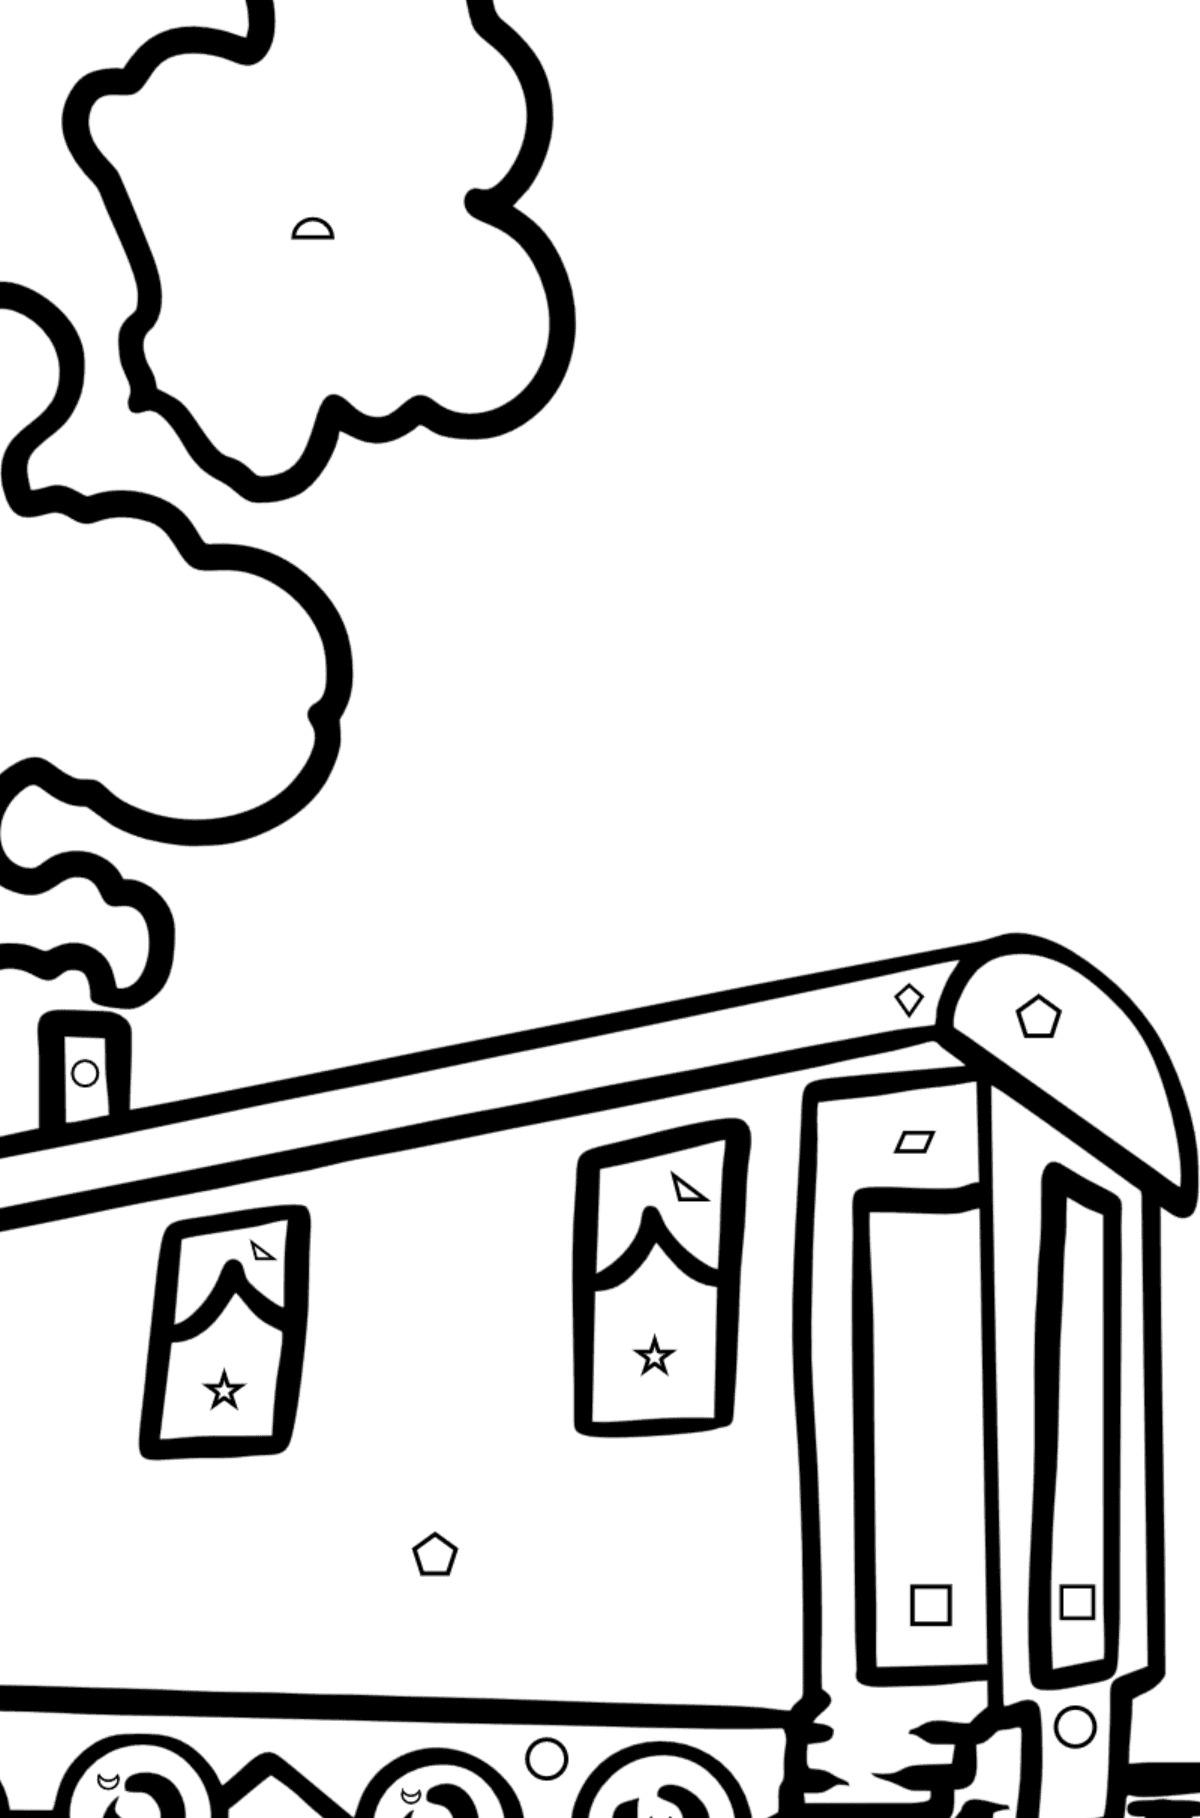 Railway coloring page - Coloring by Geometric Shapes for Kids